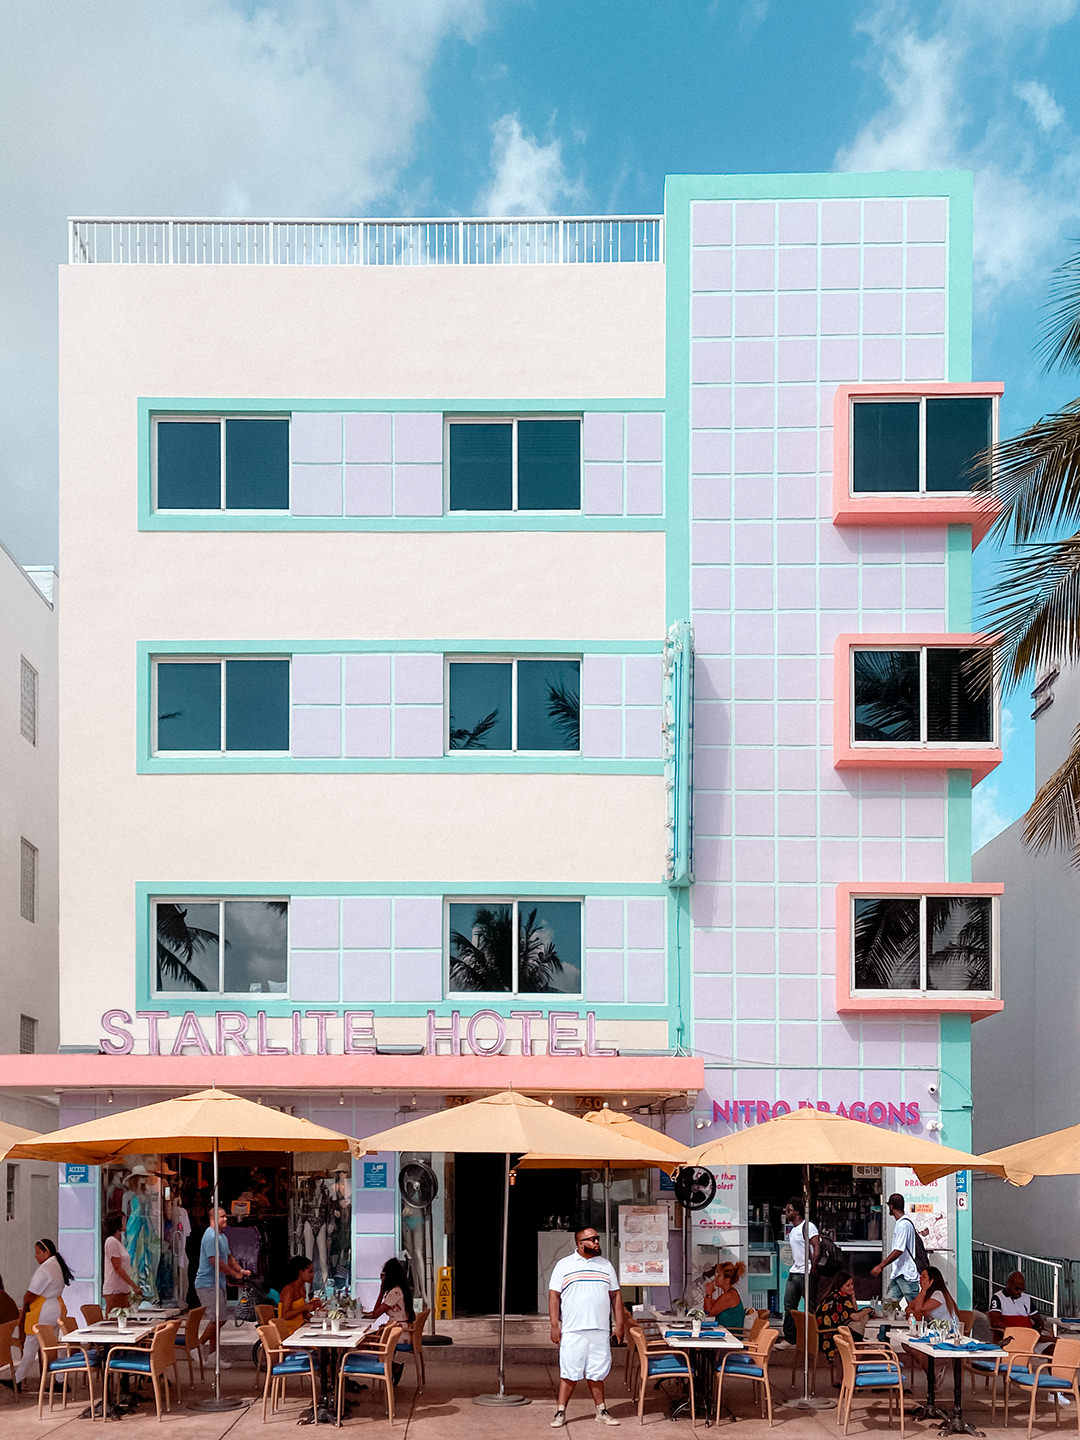 Iconic Miami Beach Hotel on Ocean Drive - photographed by Nicolai Boenig